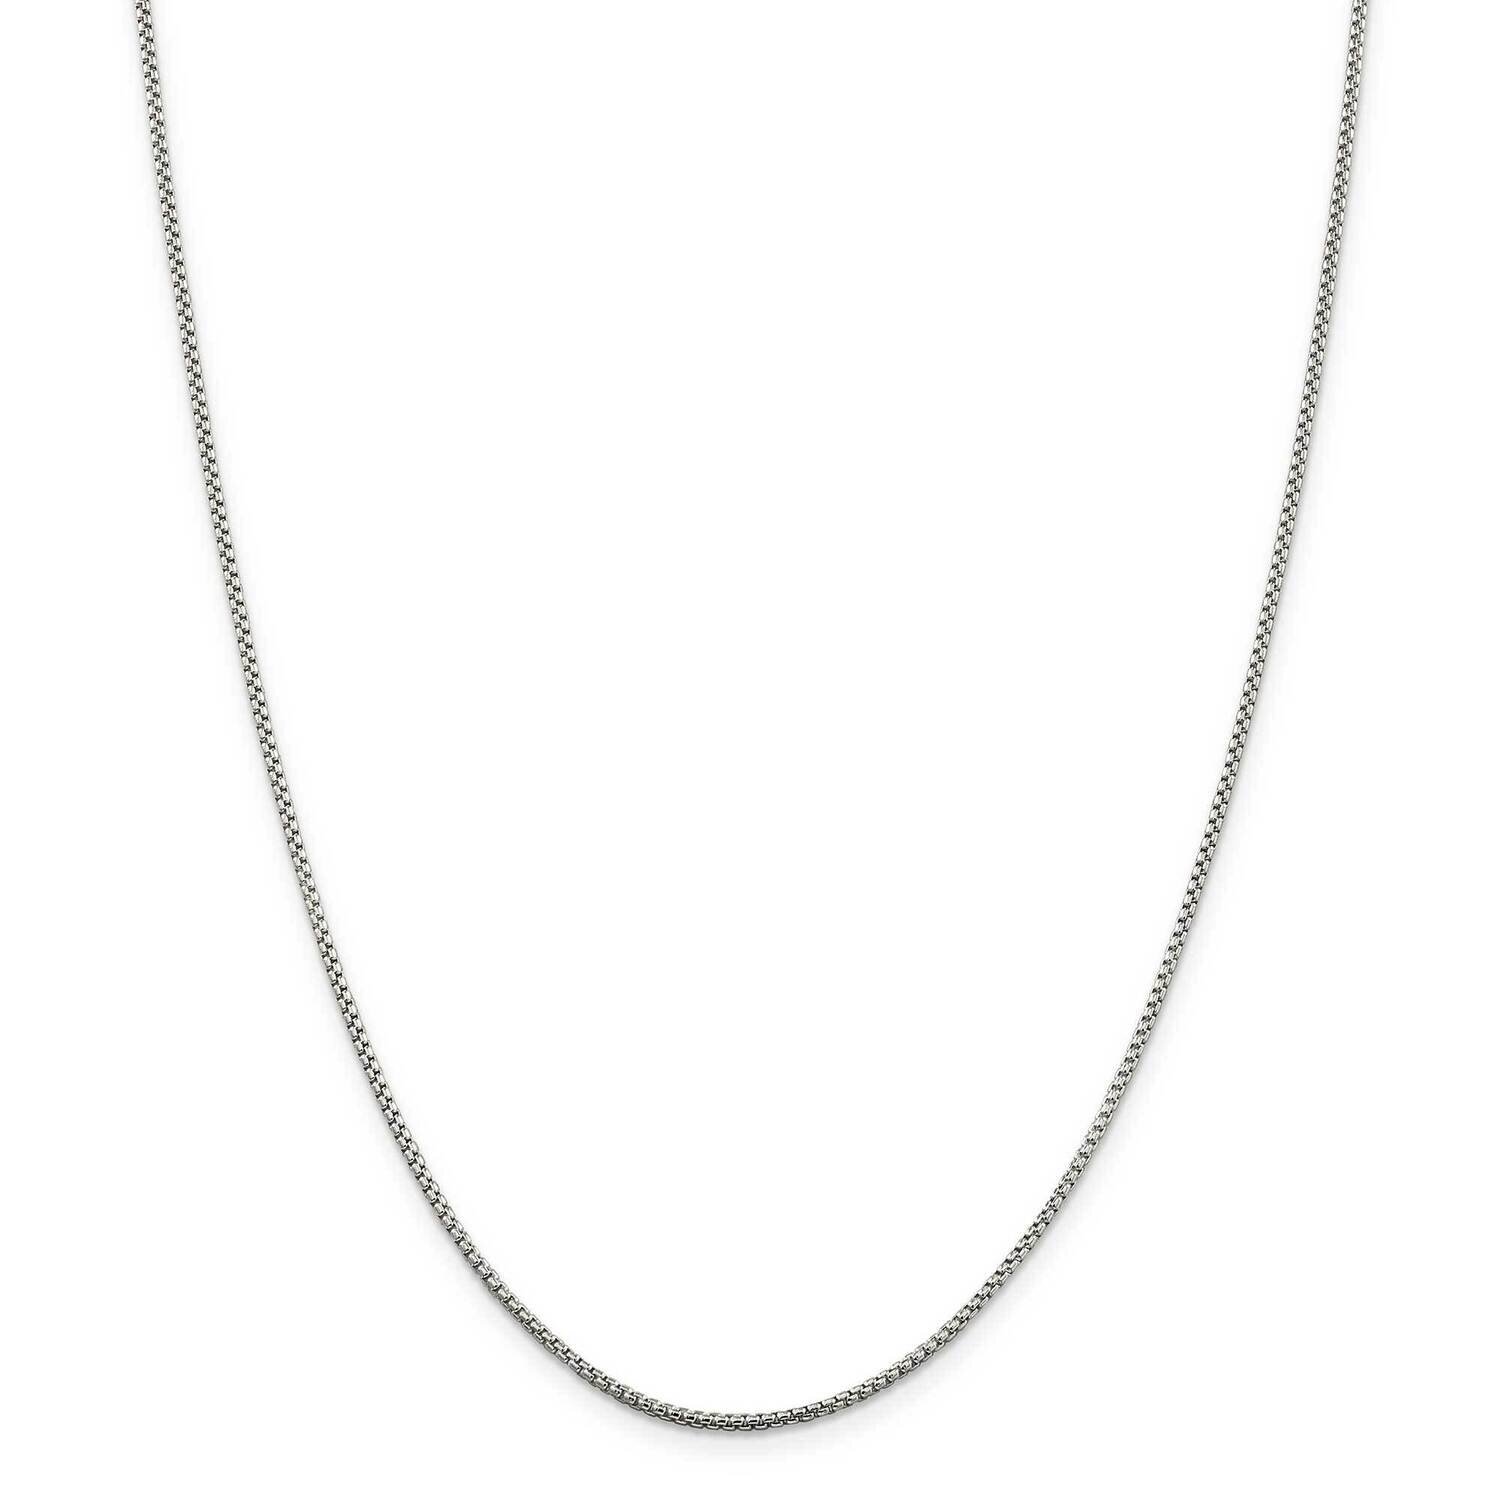 1.5mm Round Box Chain 36 Inch Sterling Silver QHX028-36